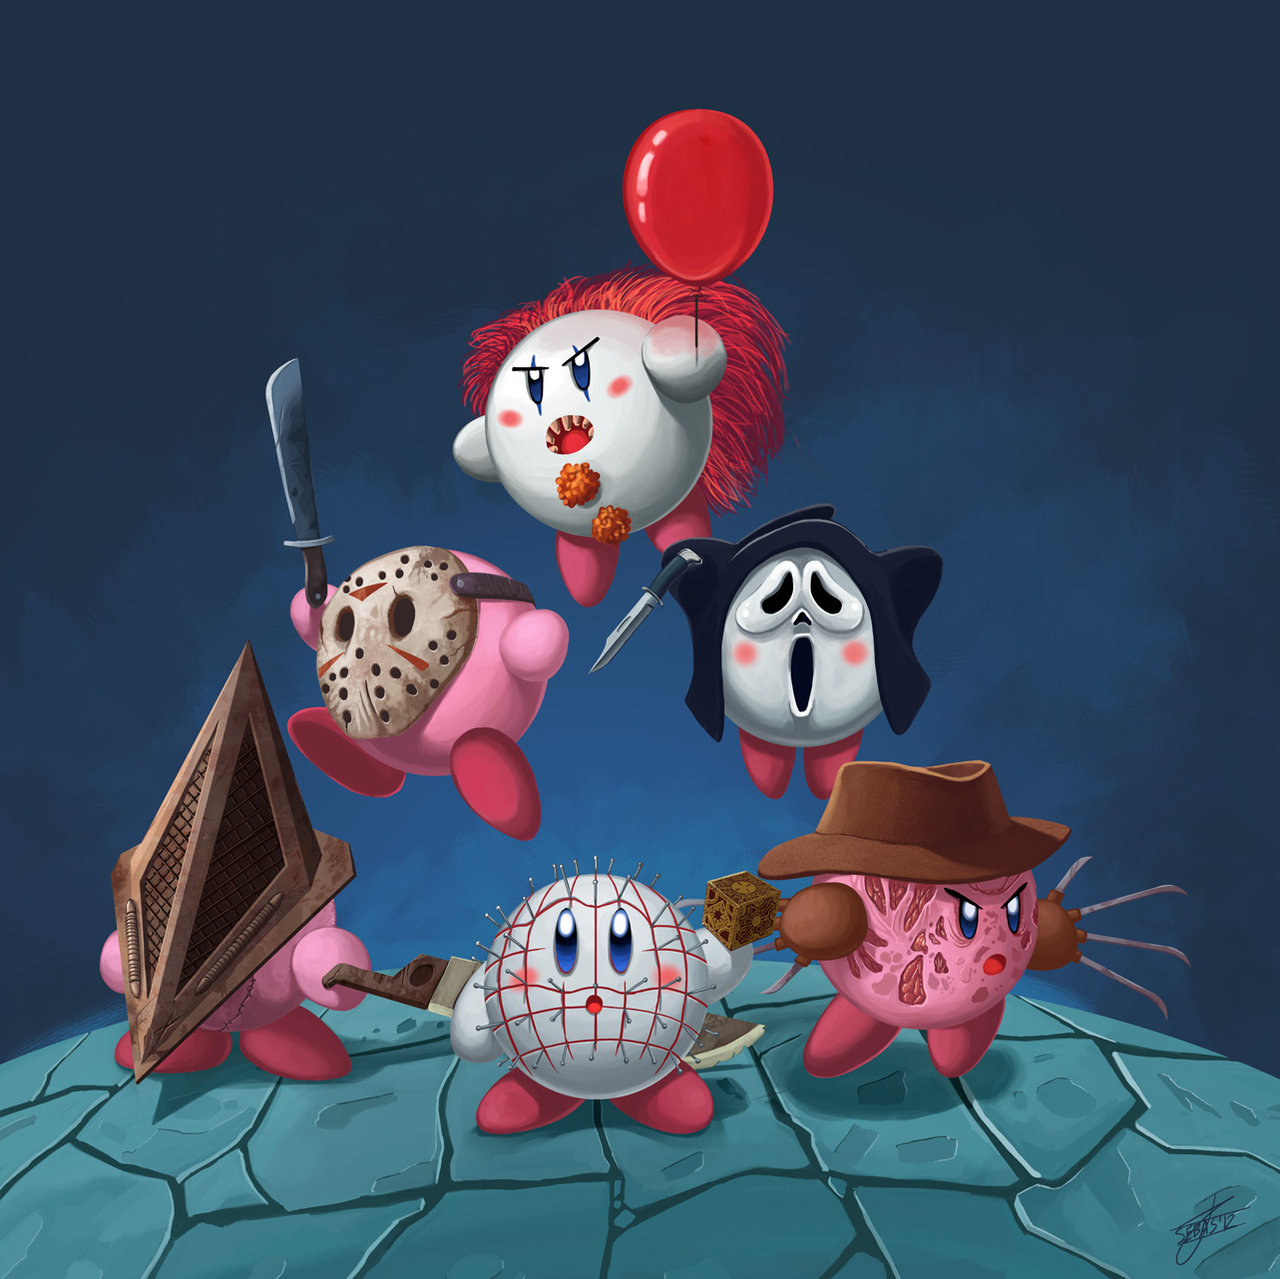 Freddy Krueger Ghostface Jason Voorhees Kirby Pennywise The Dancing Clown Pinhead Pyramid Head Silent Hill By Shne